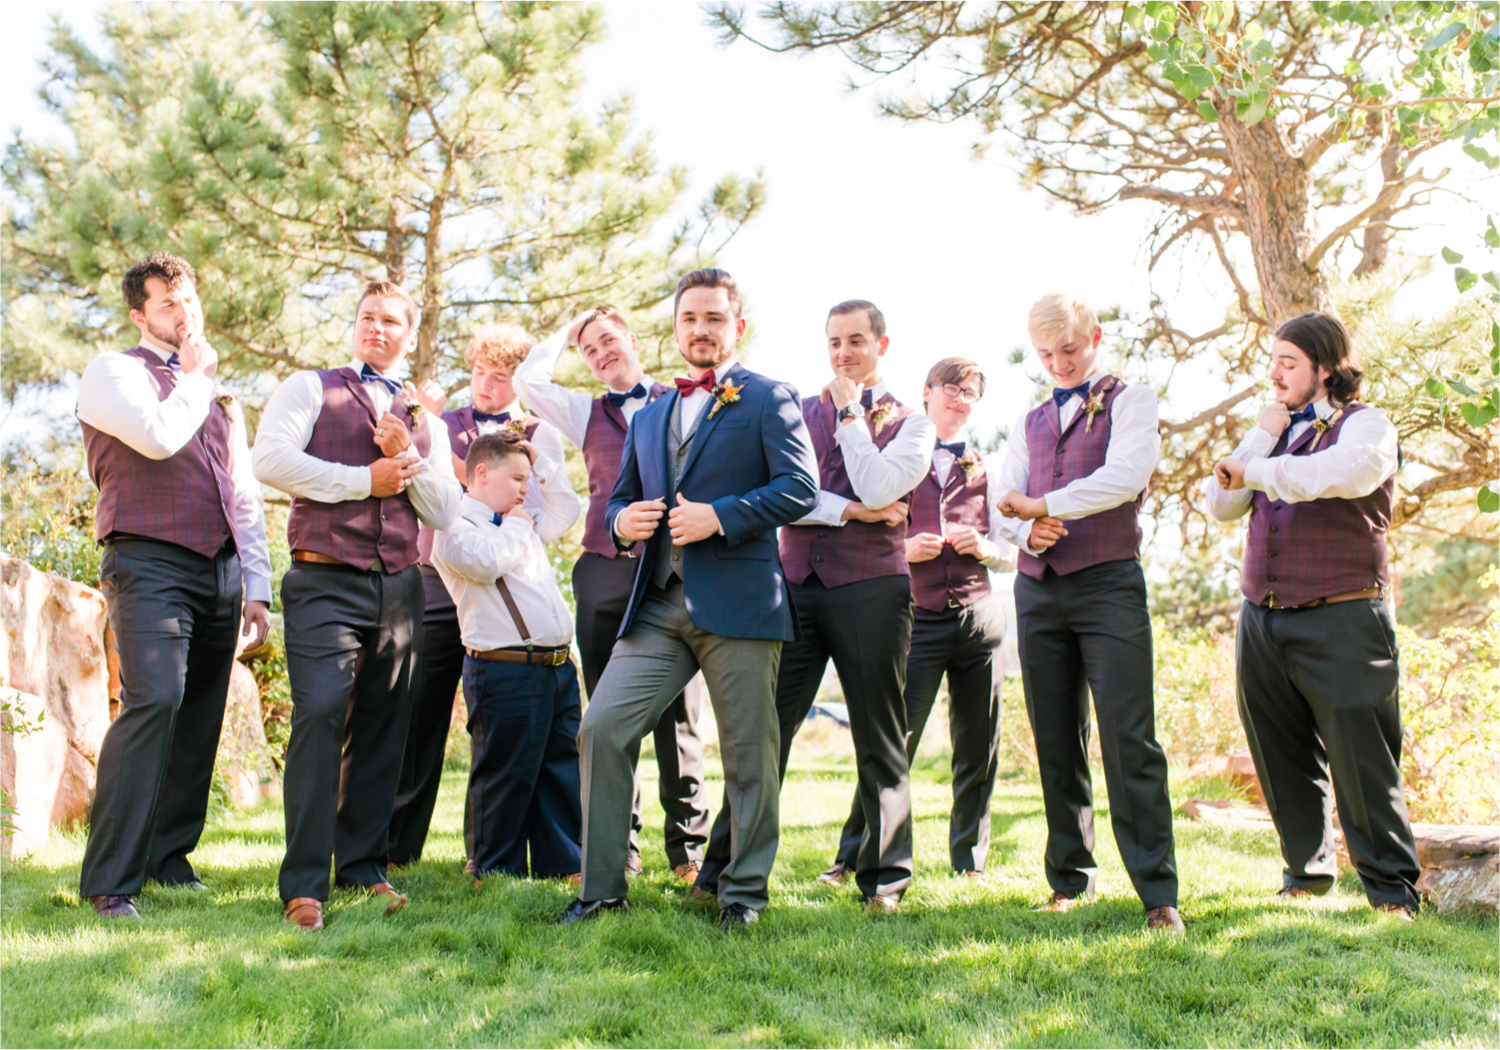 Romantic Whimsical Wedding at the Lionscrest Manor in Lyons, CO | Britni Girard Photography - Wedding Photo and Video Team | Rustic Fall Decor mixed in Burgundy, Blush, Gold and Sage | Groomsmen | Custom Suit from Jos. a Banks